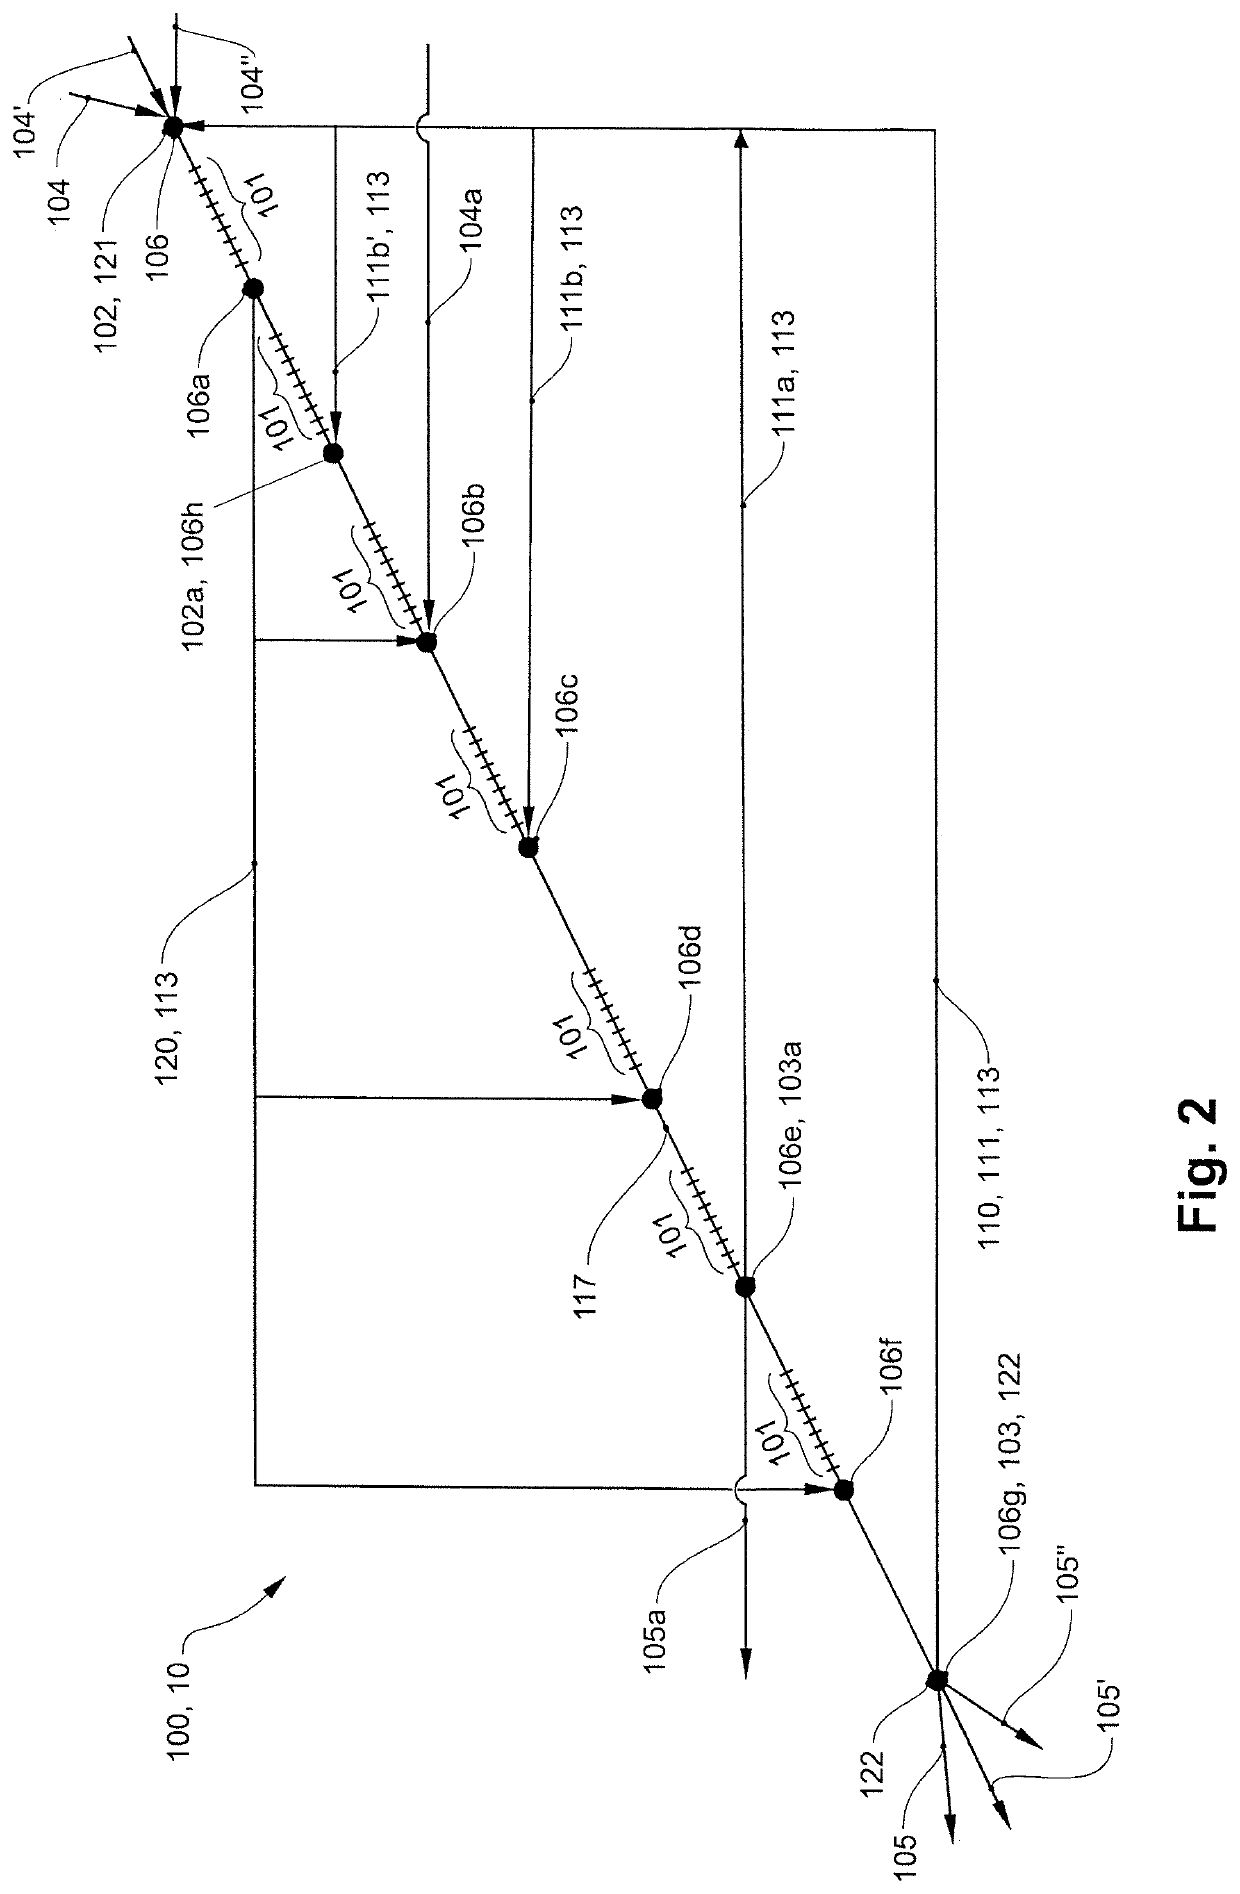 Buffer storage system for overhead conveyor systems